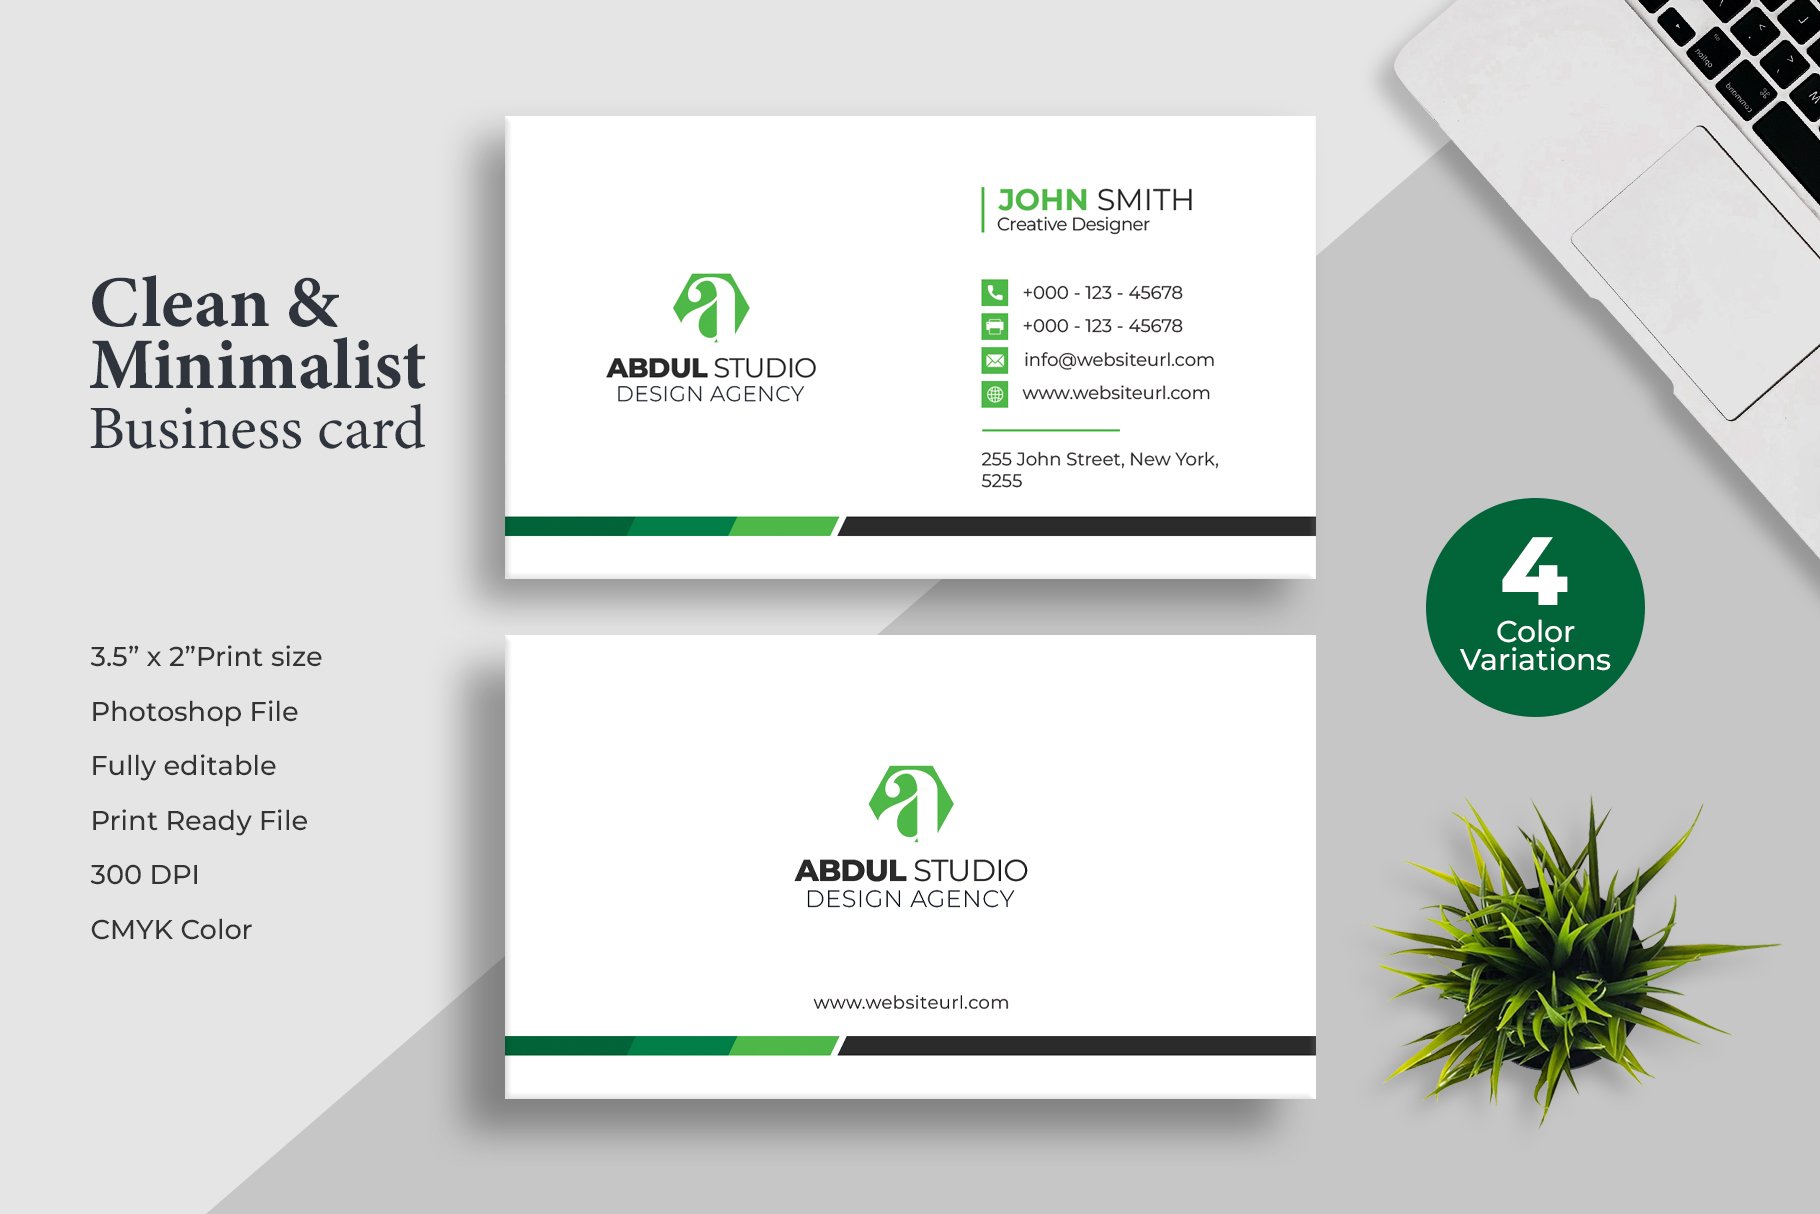 Business Card Template: How to Make a Card That Stands Out